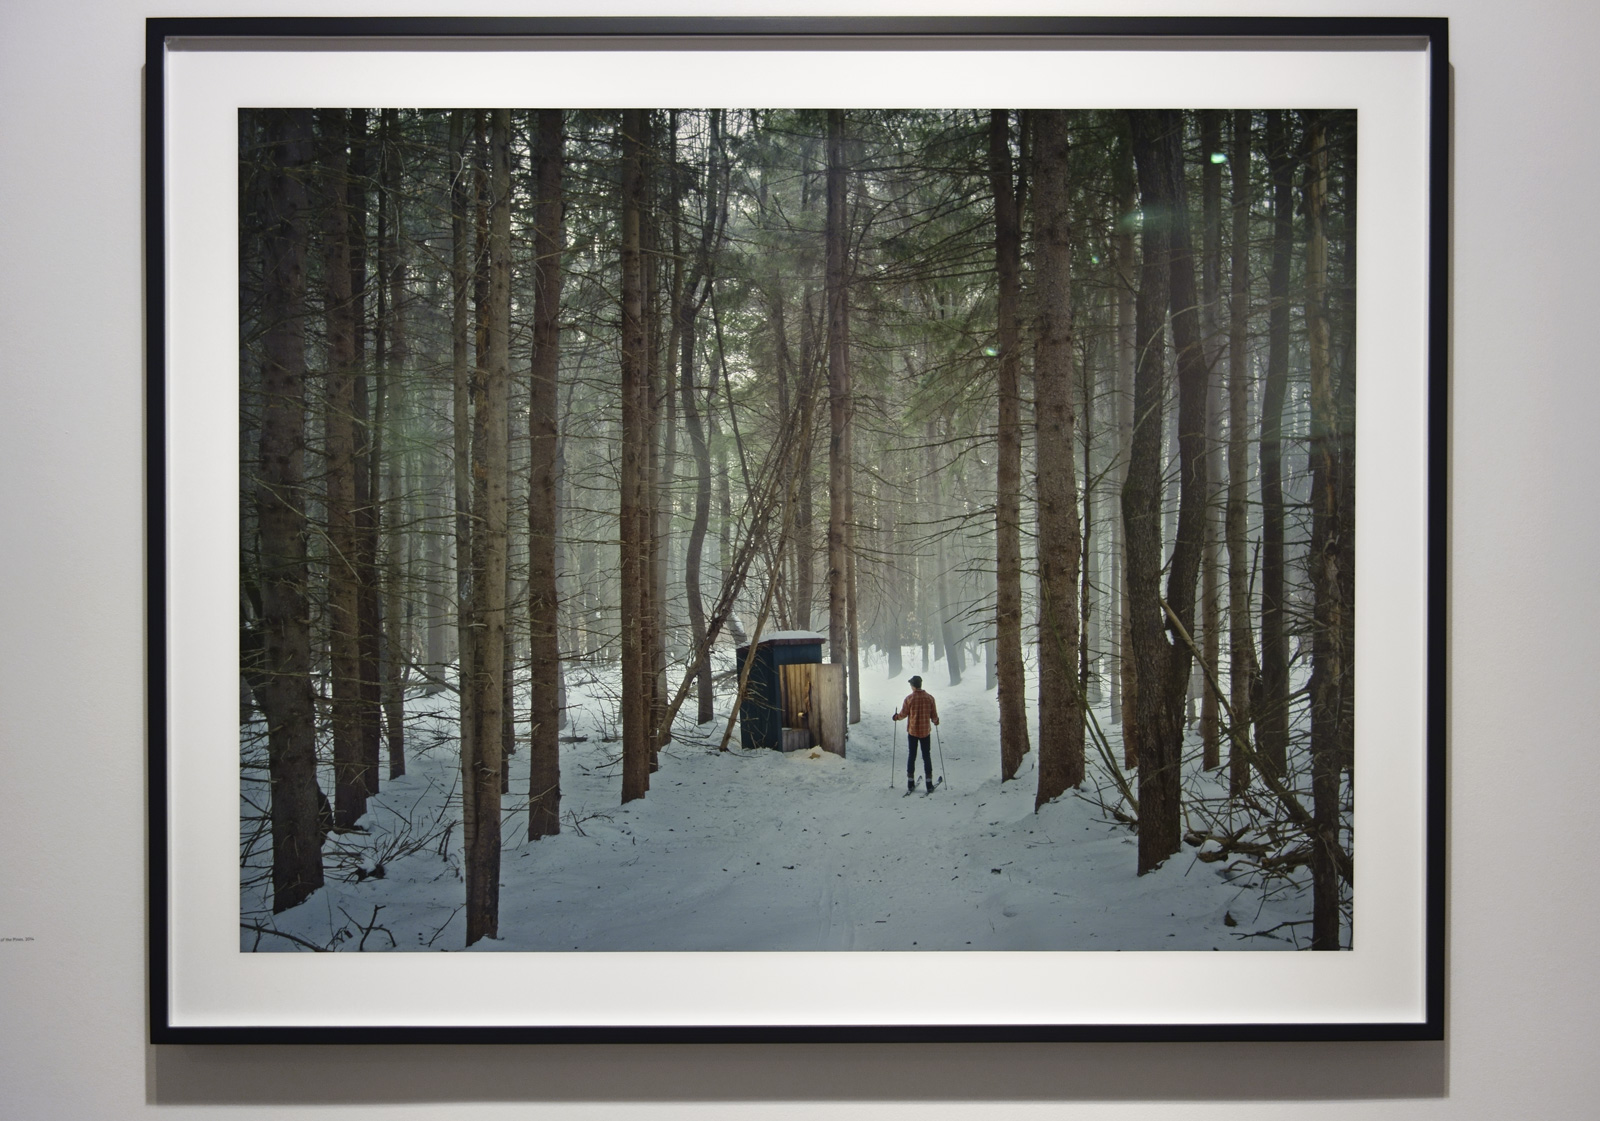 Installation view of Room 3 of 'Gregory Crewdson: Cathedral of the Pines' at The Photographers' Gallery